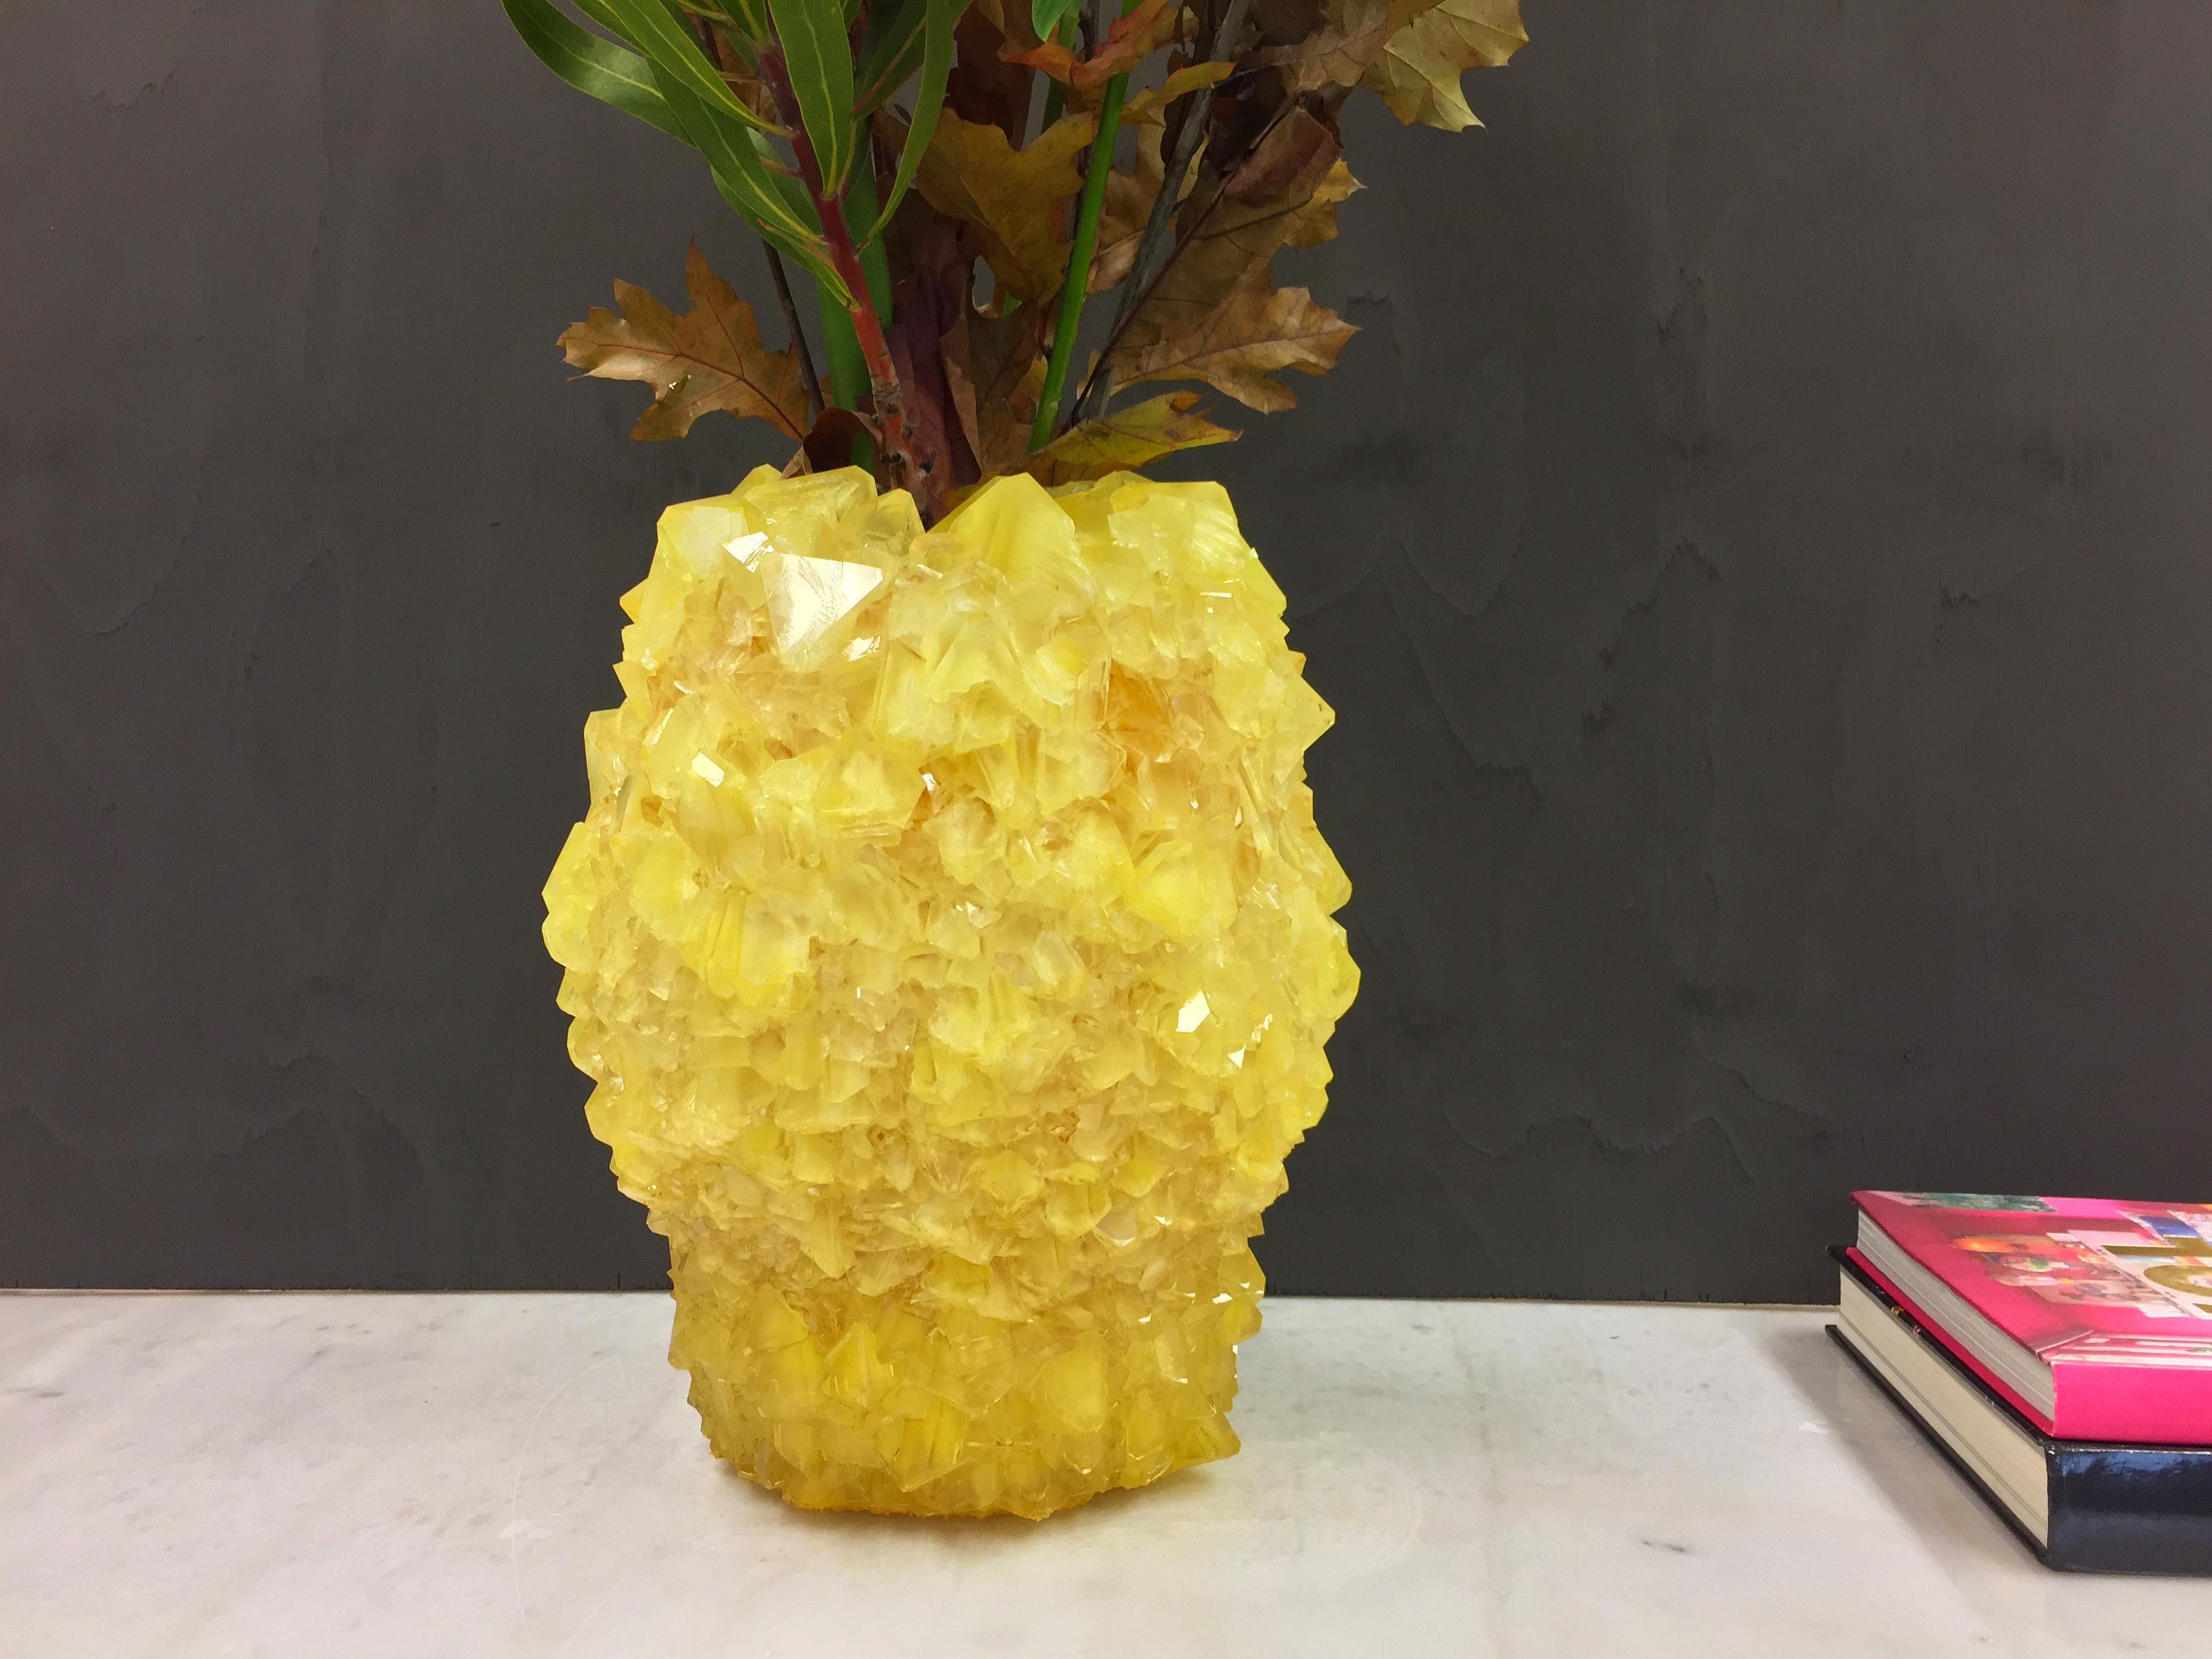 Contemporary Crystallized Yellow Vase, Unique Vase by Isaac Monte